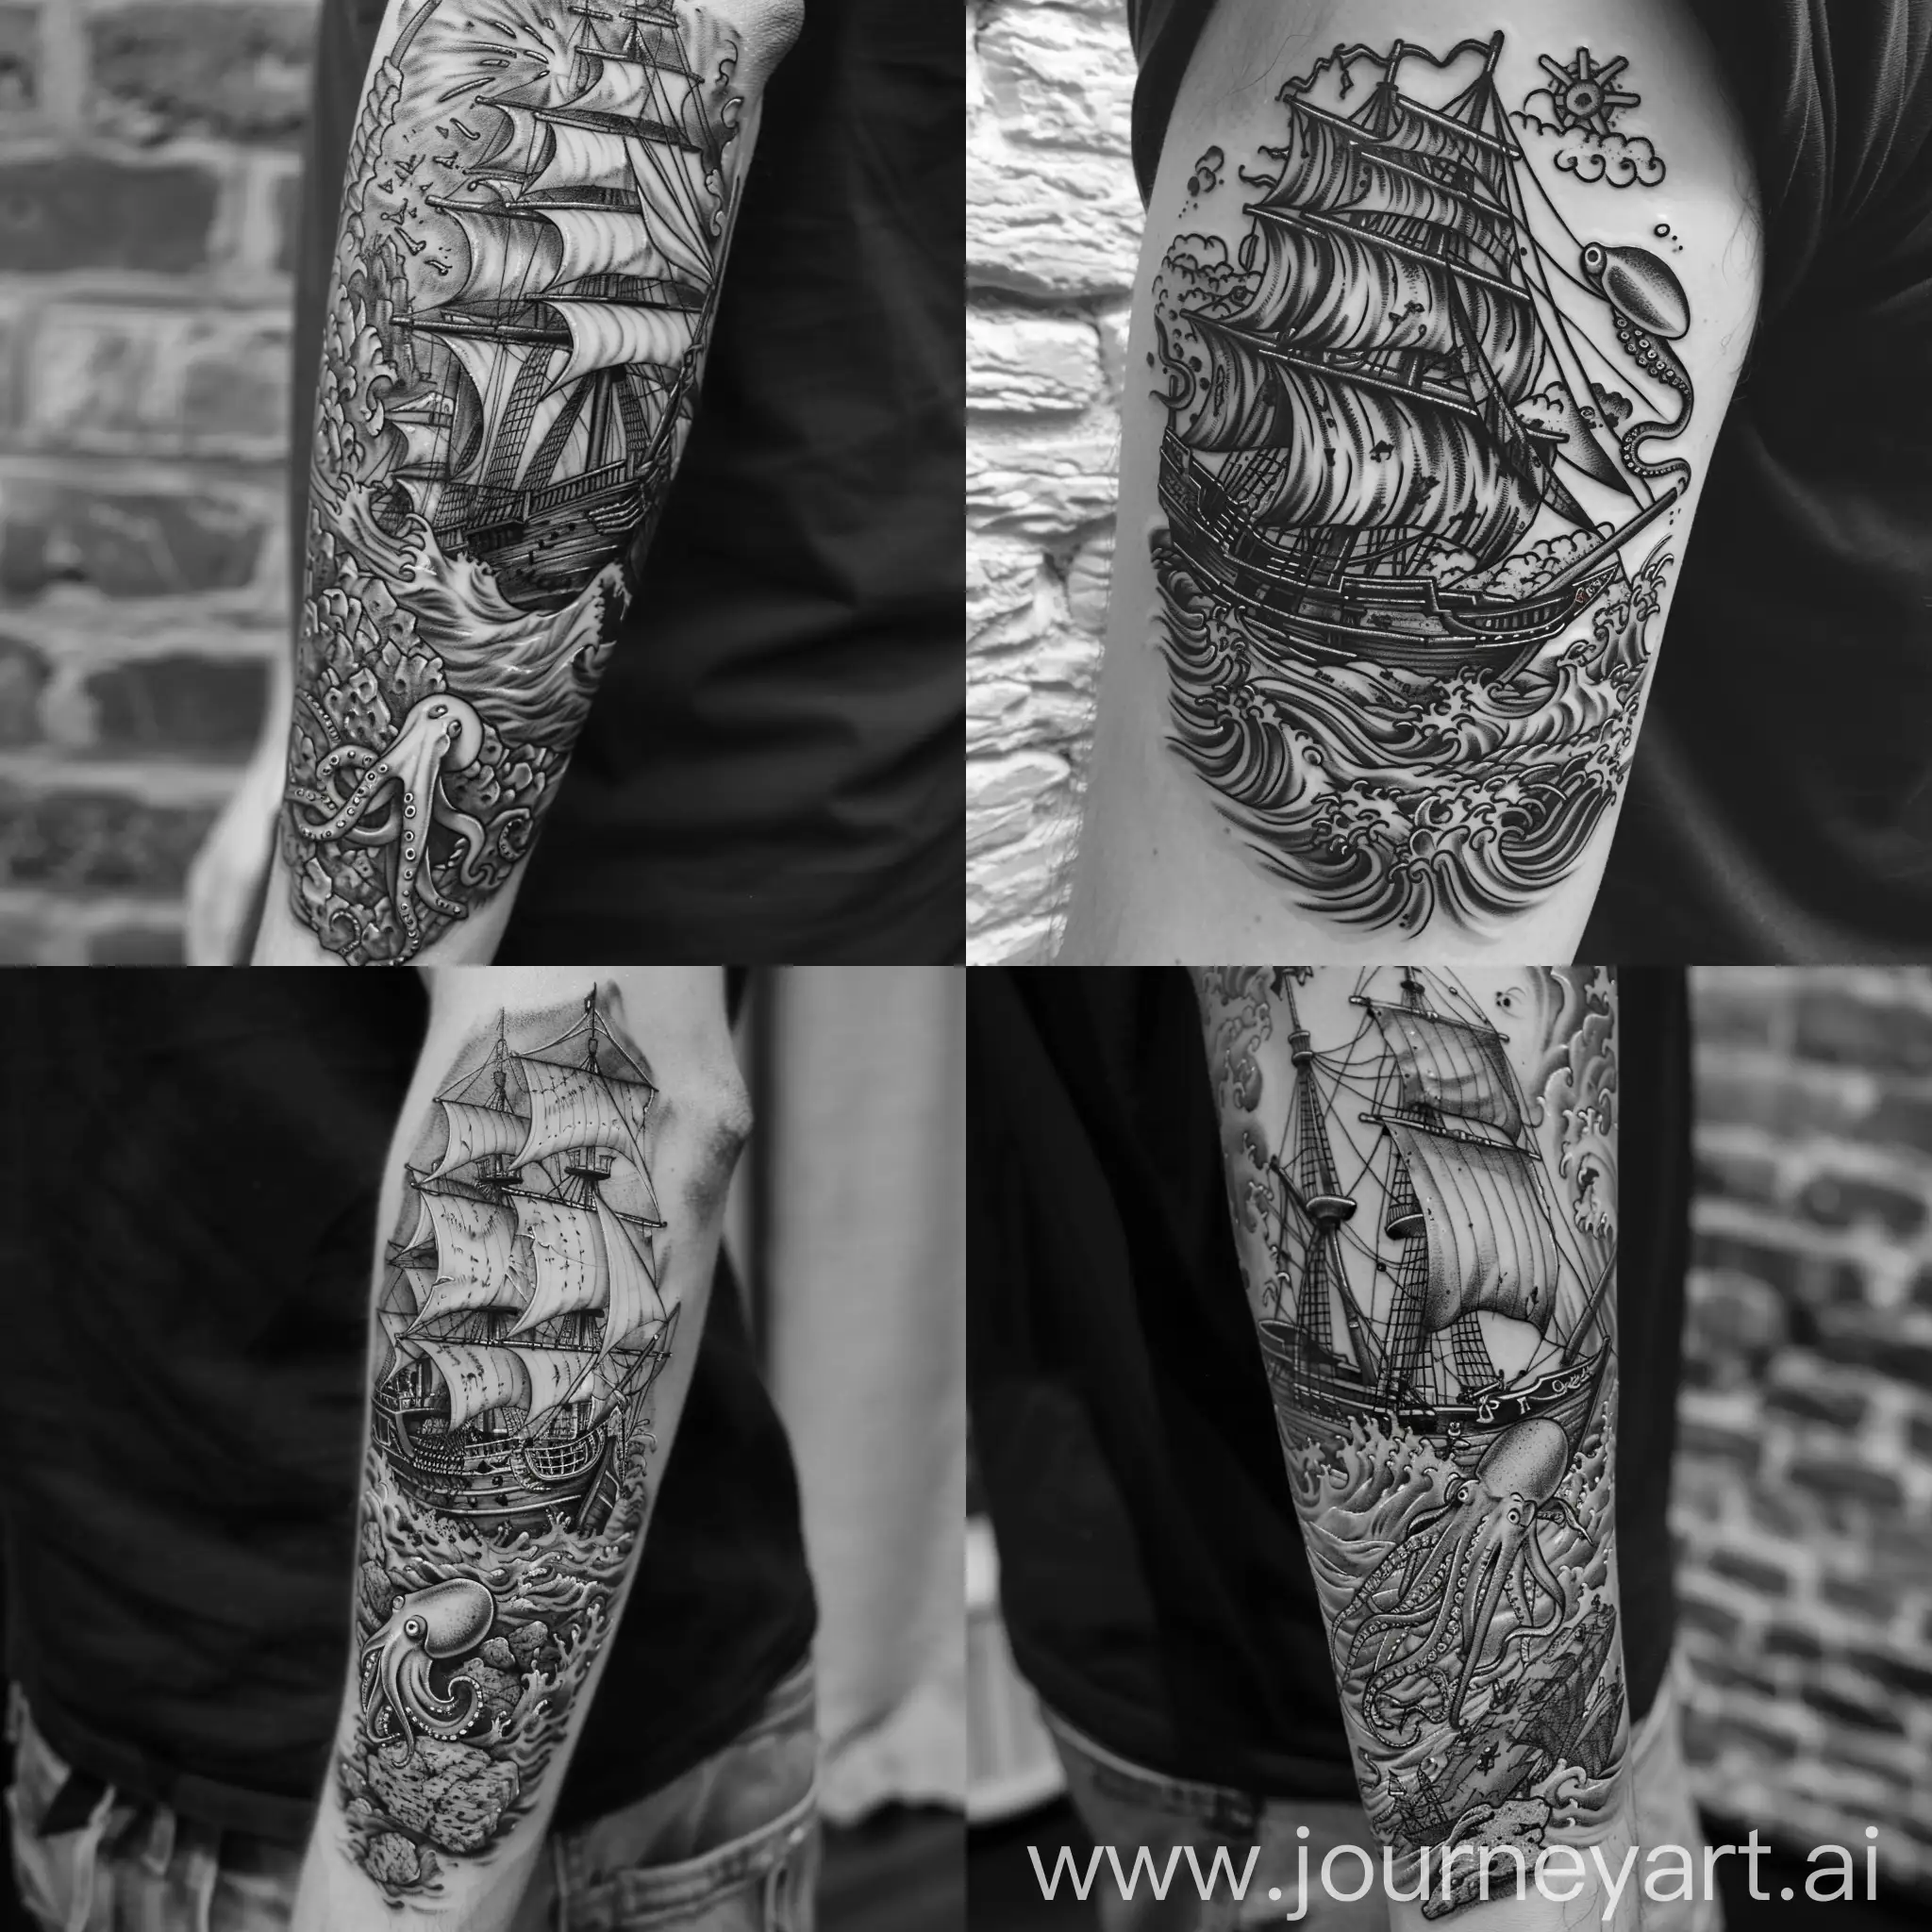 Black and white style tatoo,  of a pirate ship, giant squid, rough seas and a rocky reef